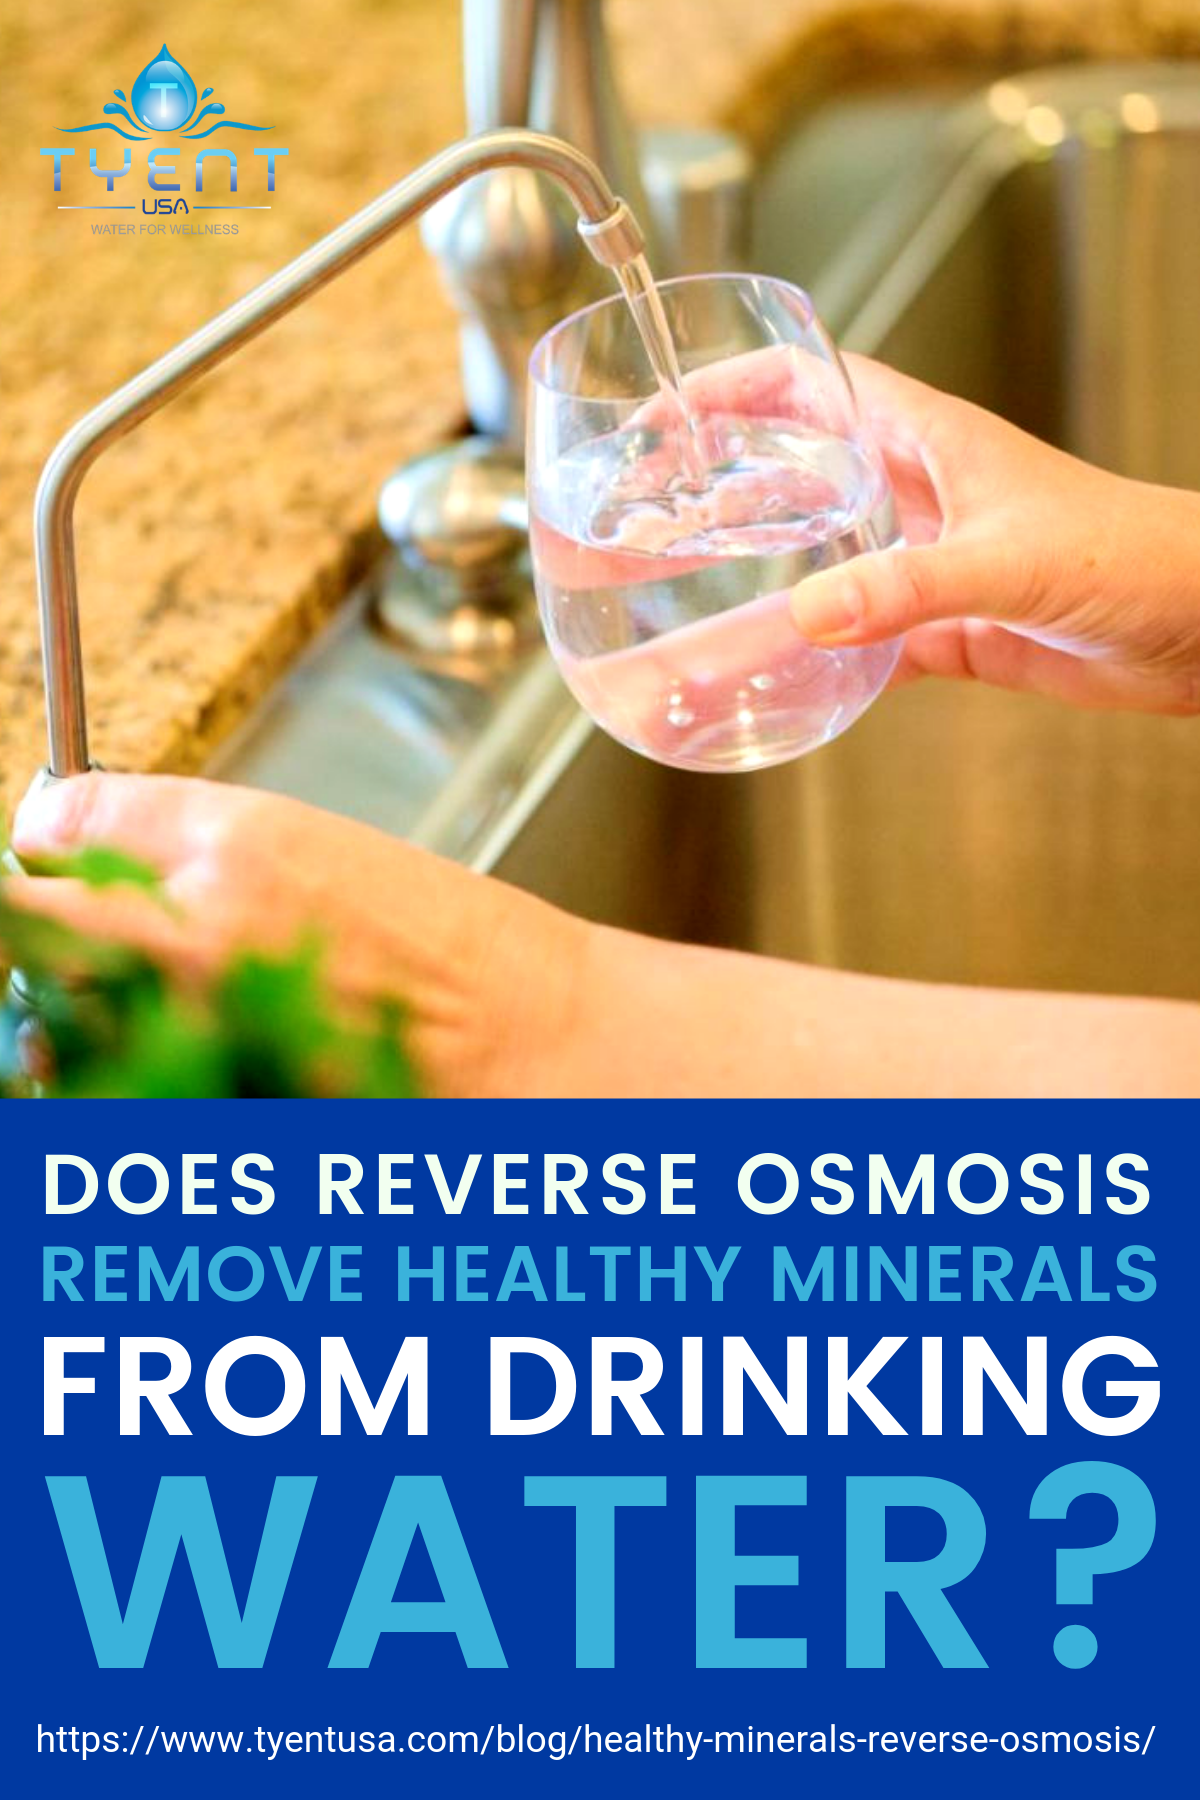 Does Reverse Osmosis Remove Healthy Minerals From Drinking Water? https://www.tyentusa.com/blog/healthy-minerals-reverse-osmosis/